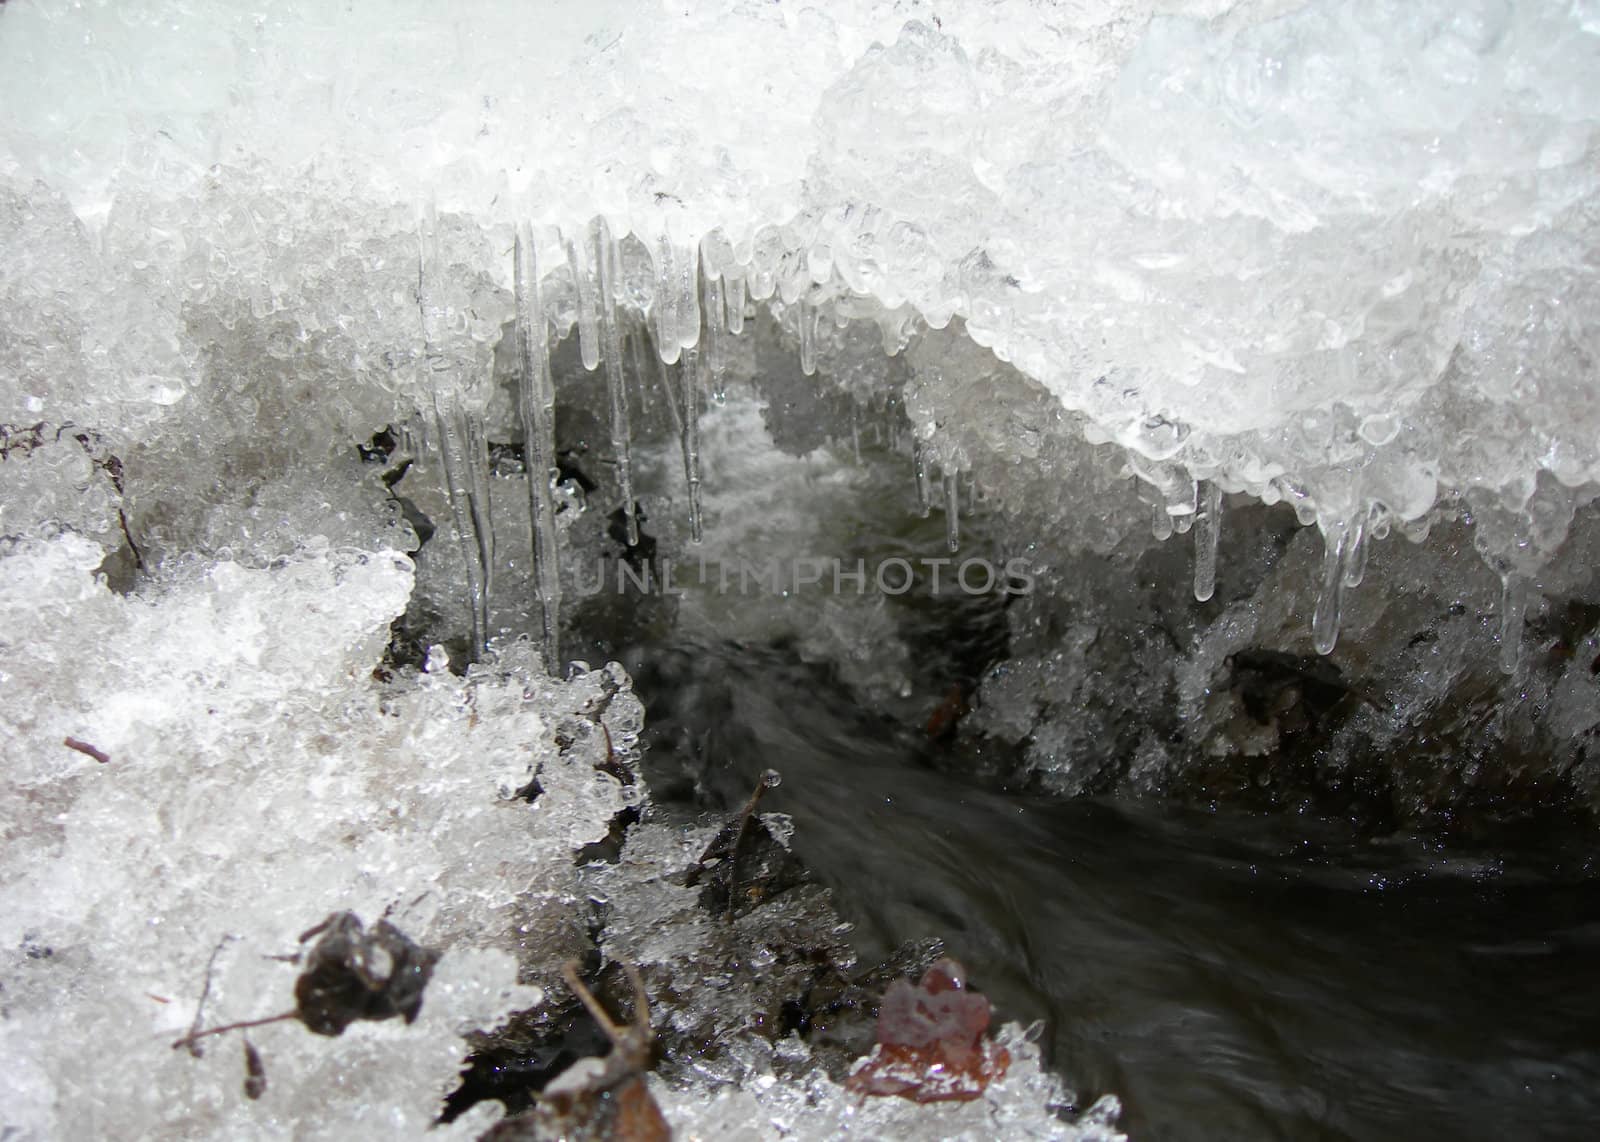                  Brook is covered by ice and water flows under them with a small strem                  